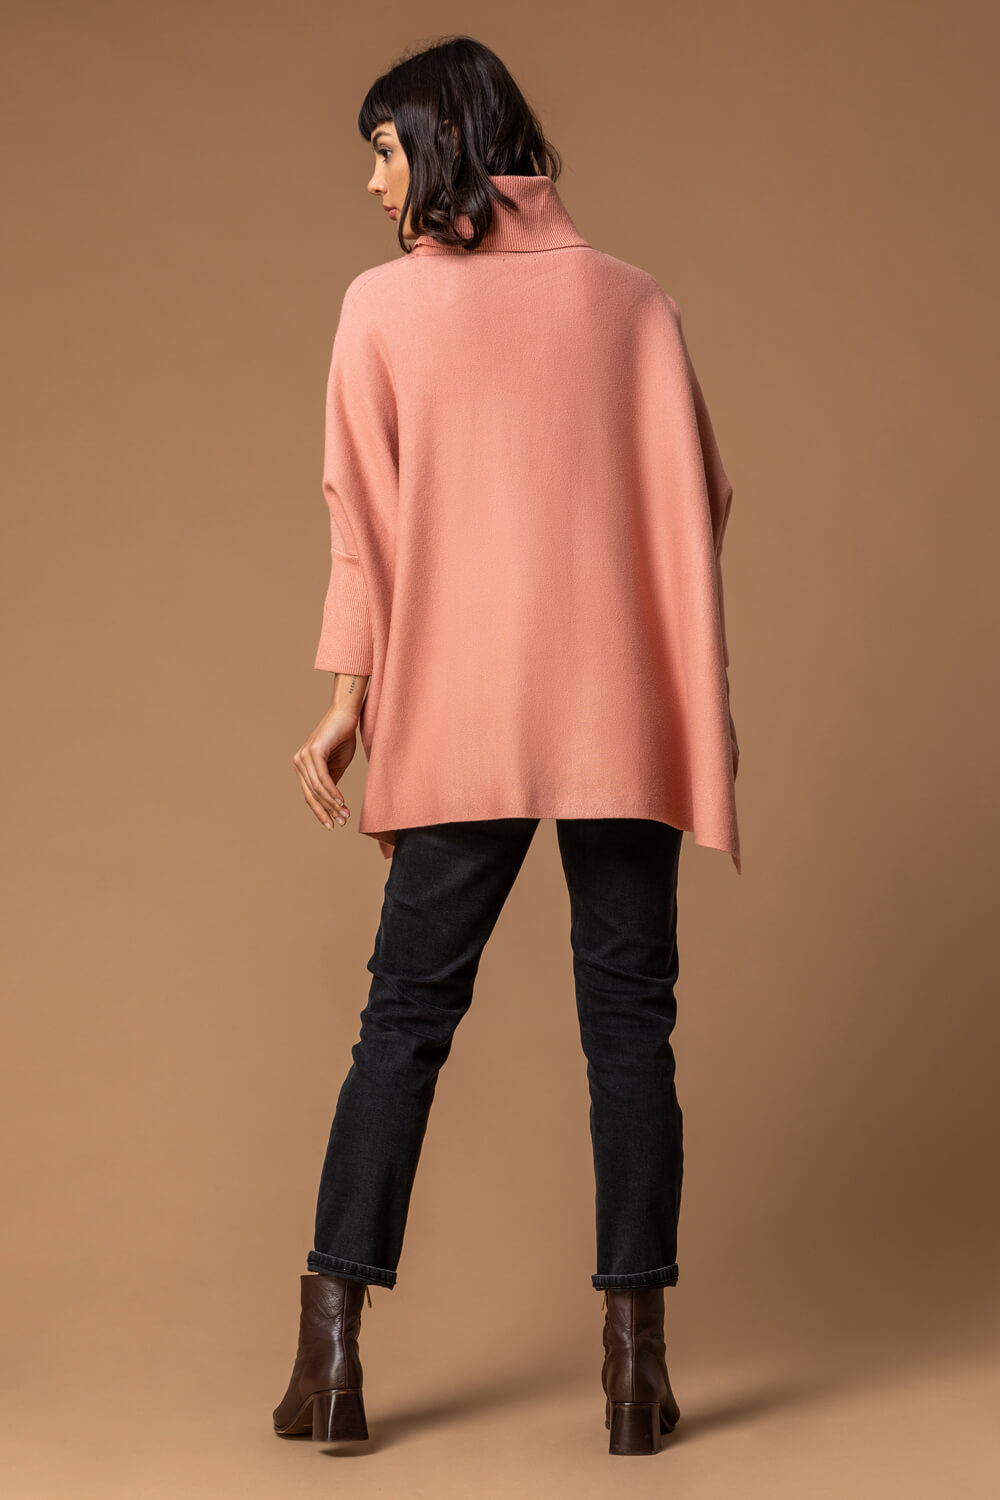 PINK Longline Roll Neck Poncho Jumper, Image 2 of 4